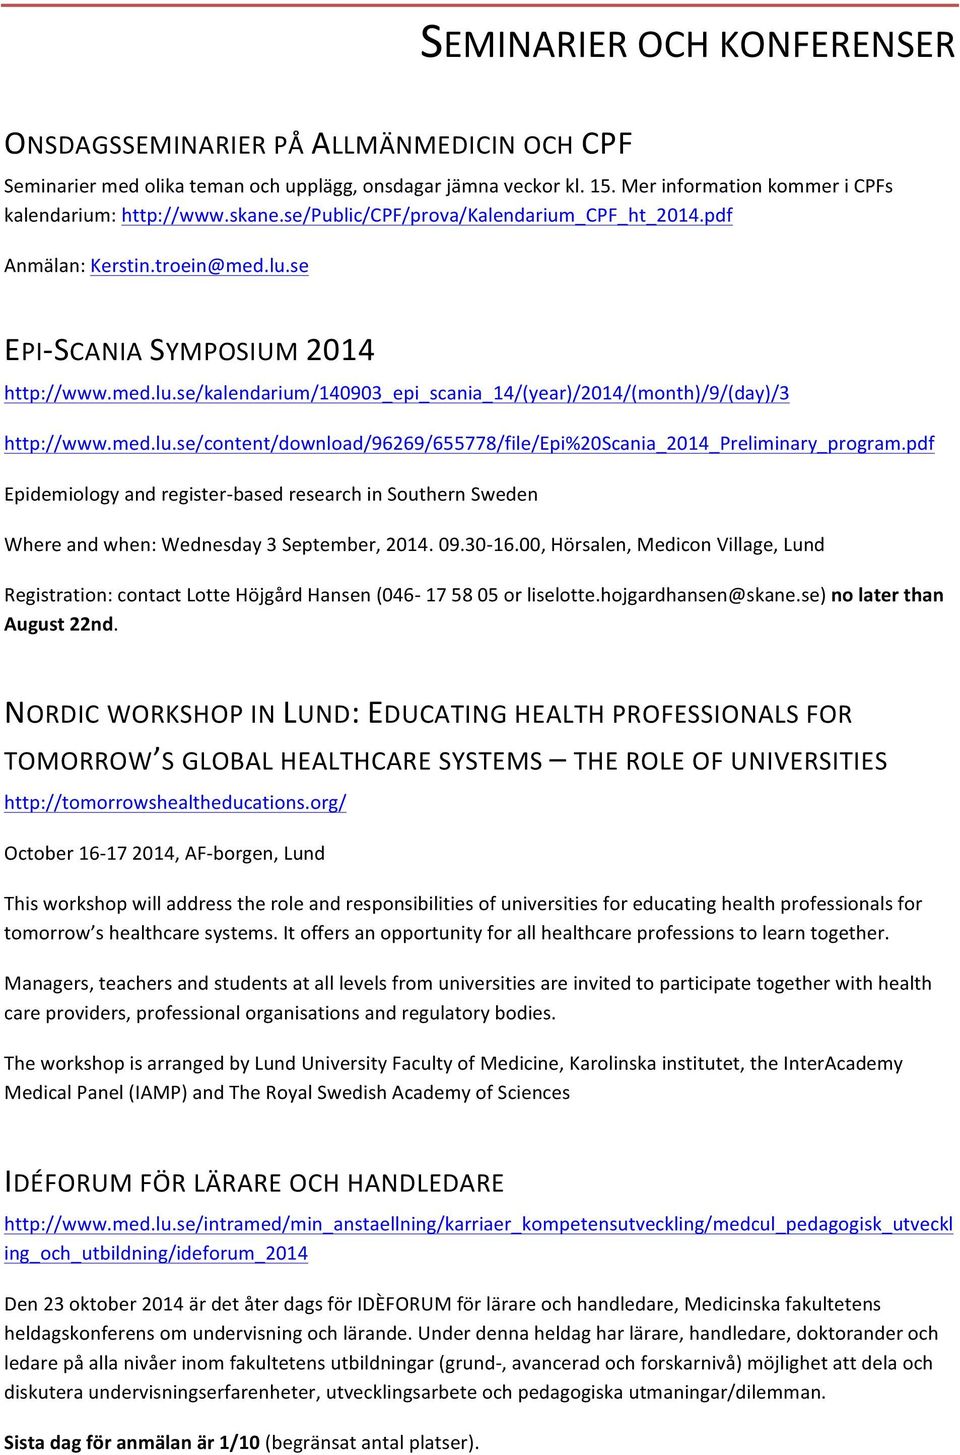 med.lu.se/content/download/96269/655778/file/epi%20scania_2014_preliminary_program.pdf Epidemiology and register- based research in Southern Sweden Where and when: Wednesday 3 September, 2014. 09.